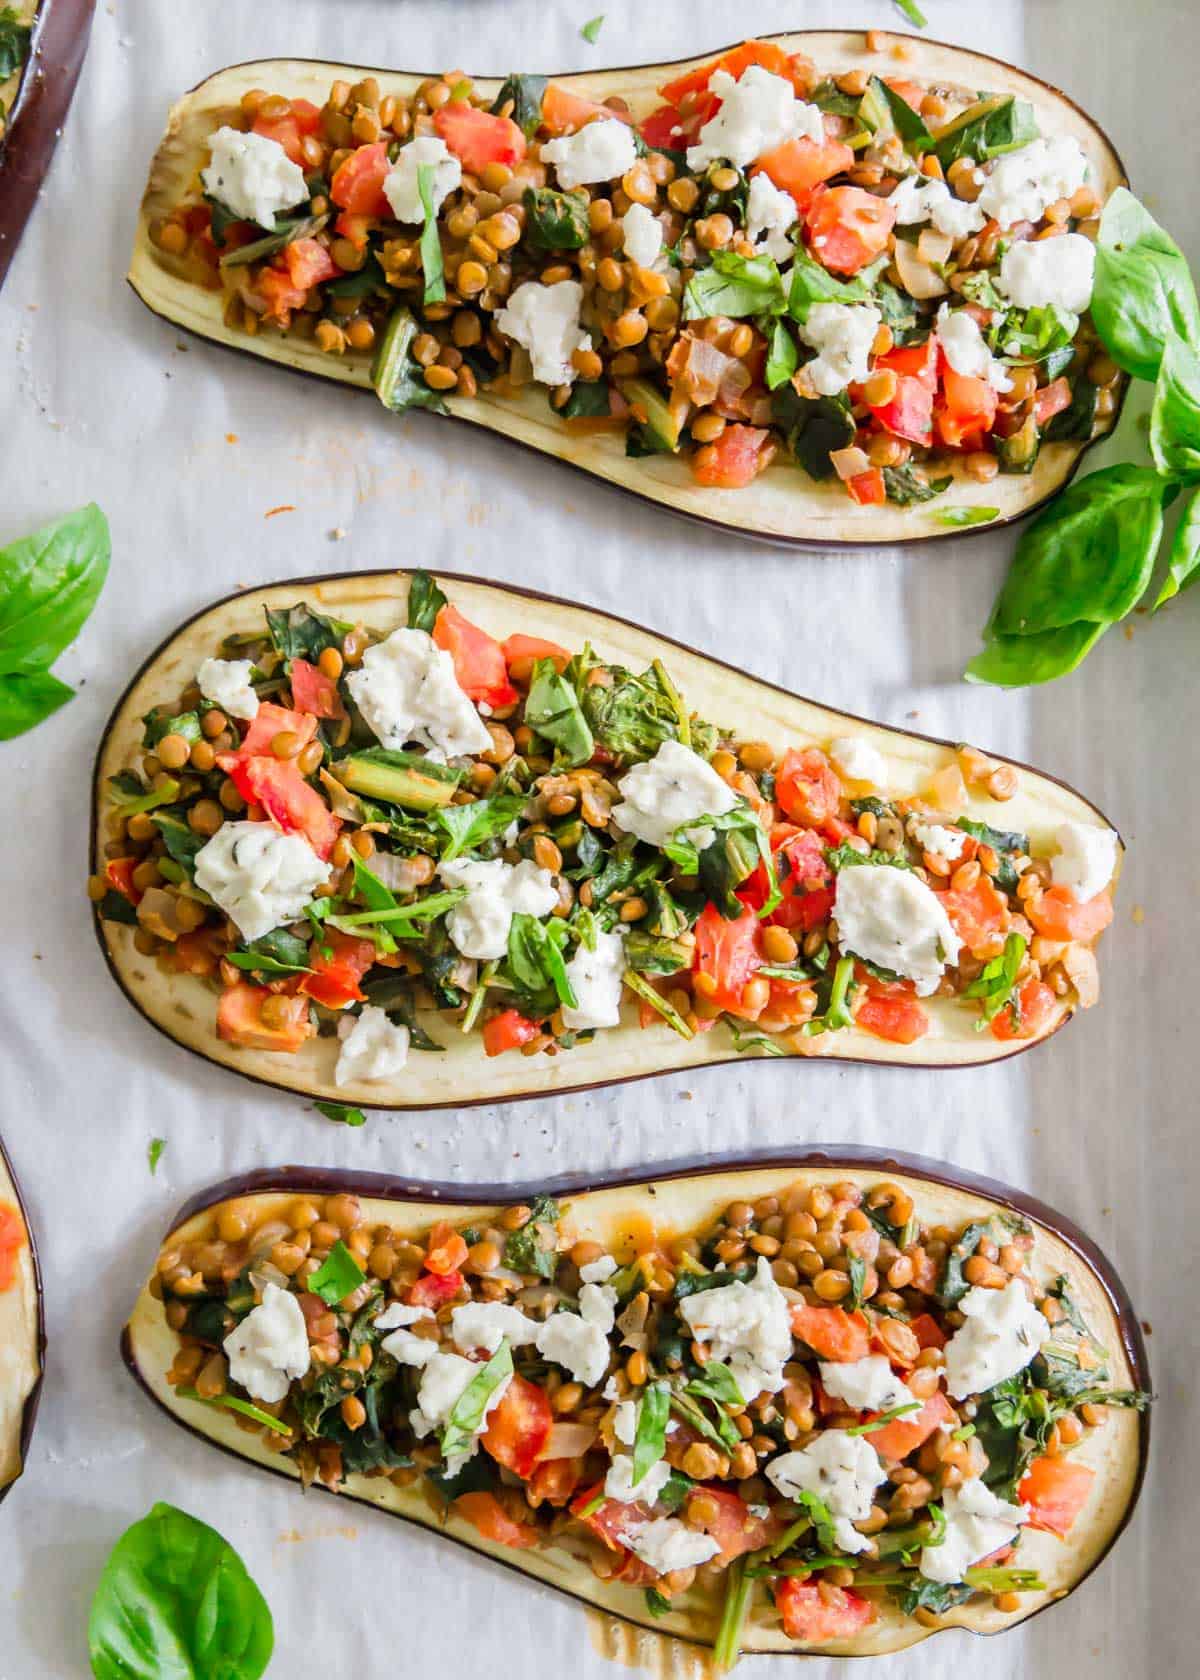 Stuffed Baked Eggplant With Lentils